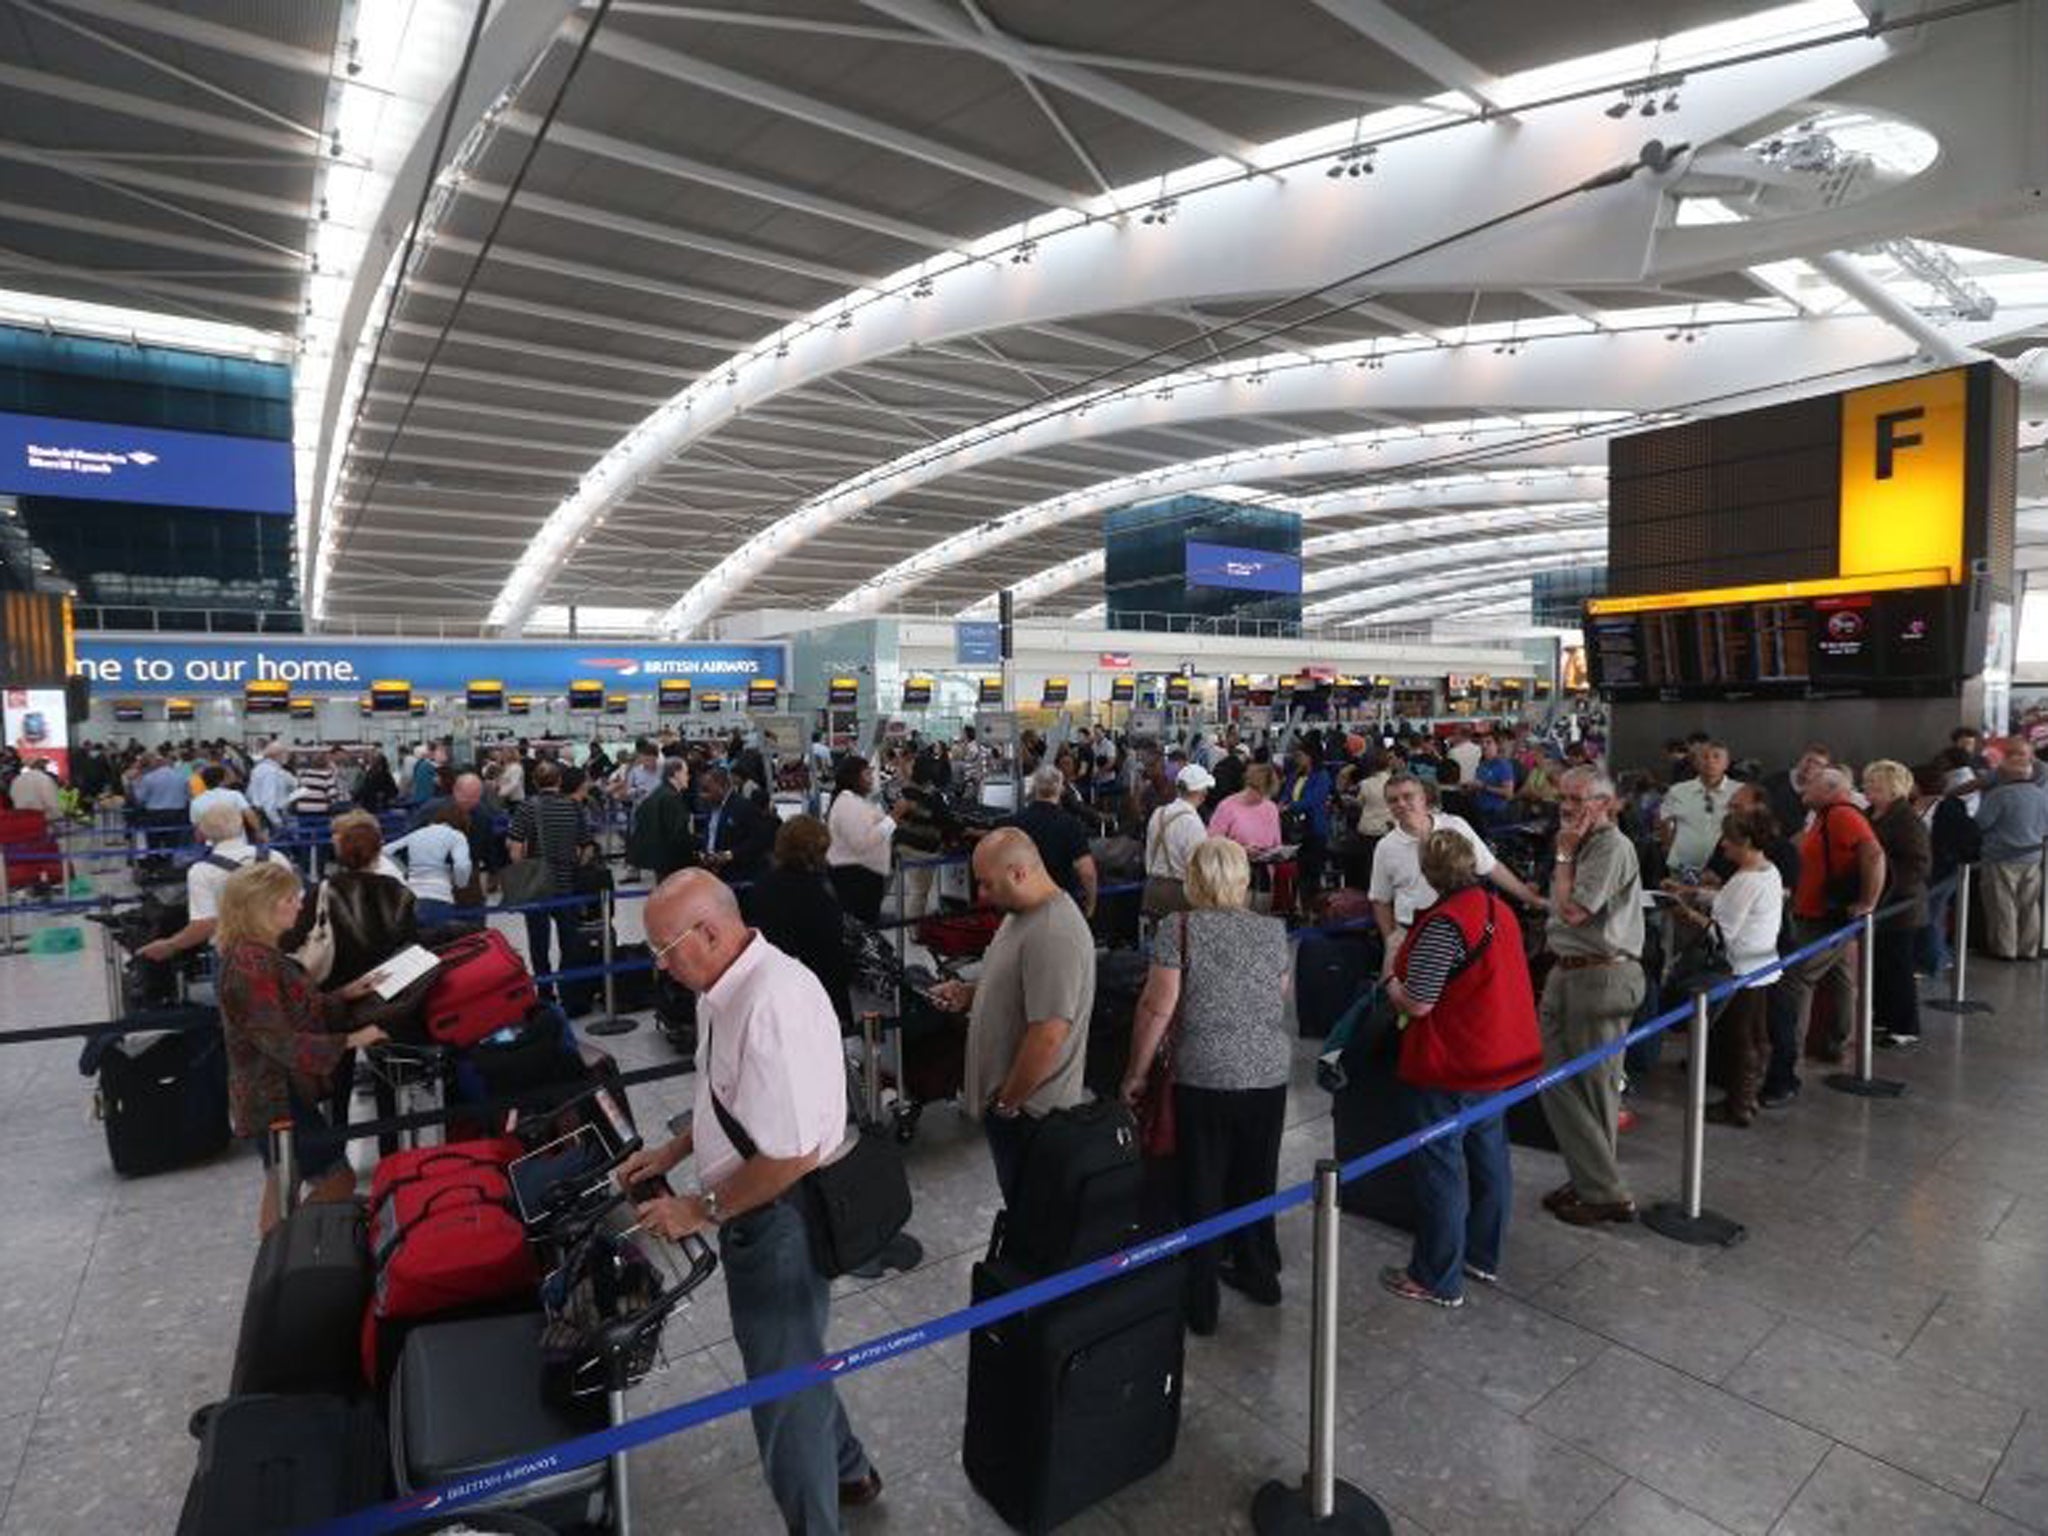 Queues form as British Airways' passengers with check-in luggage were unable to fly from Heathrow's Terminal 5 (T5) due to a computer problem